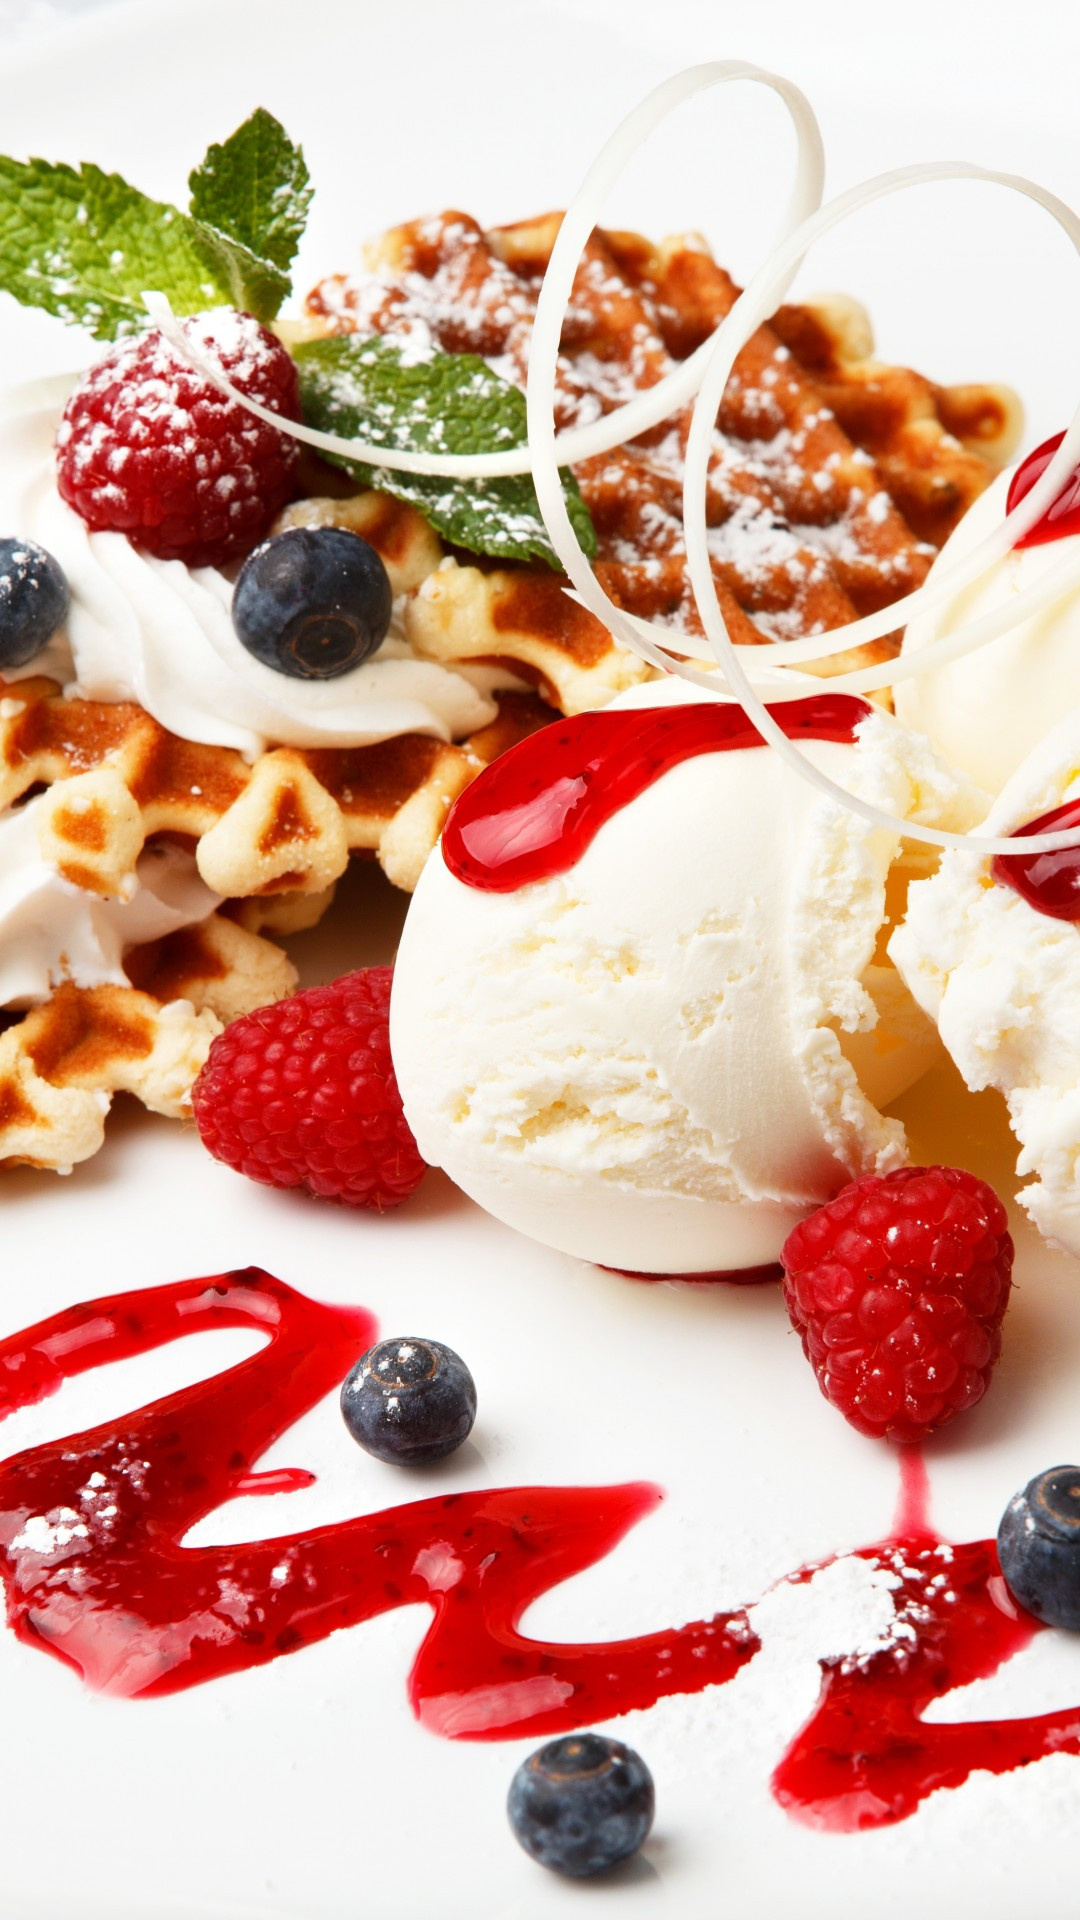 Waffle: Popular dessert, Topped with ice cream, raspberry, blueberry. 1080x1920 Full HD Wallpaper.